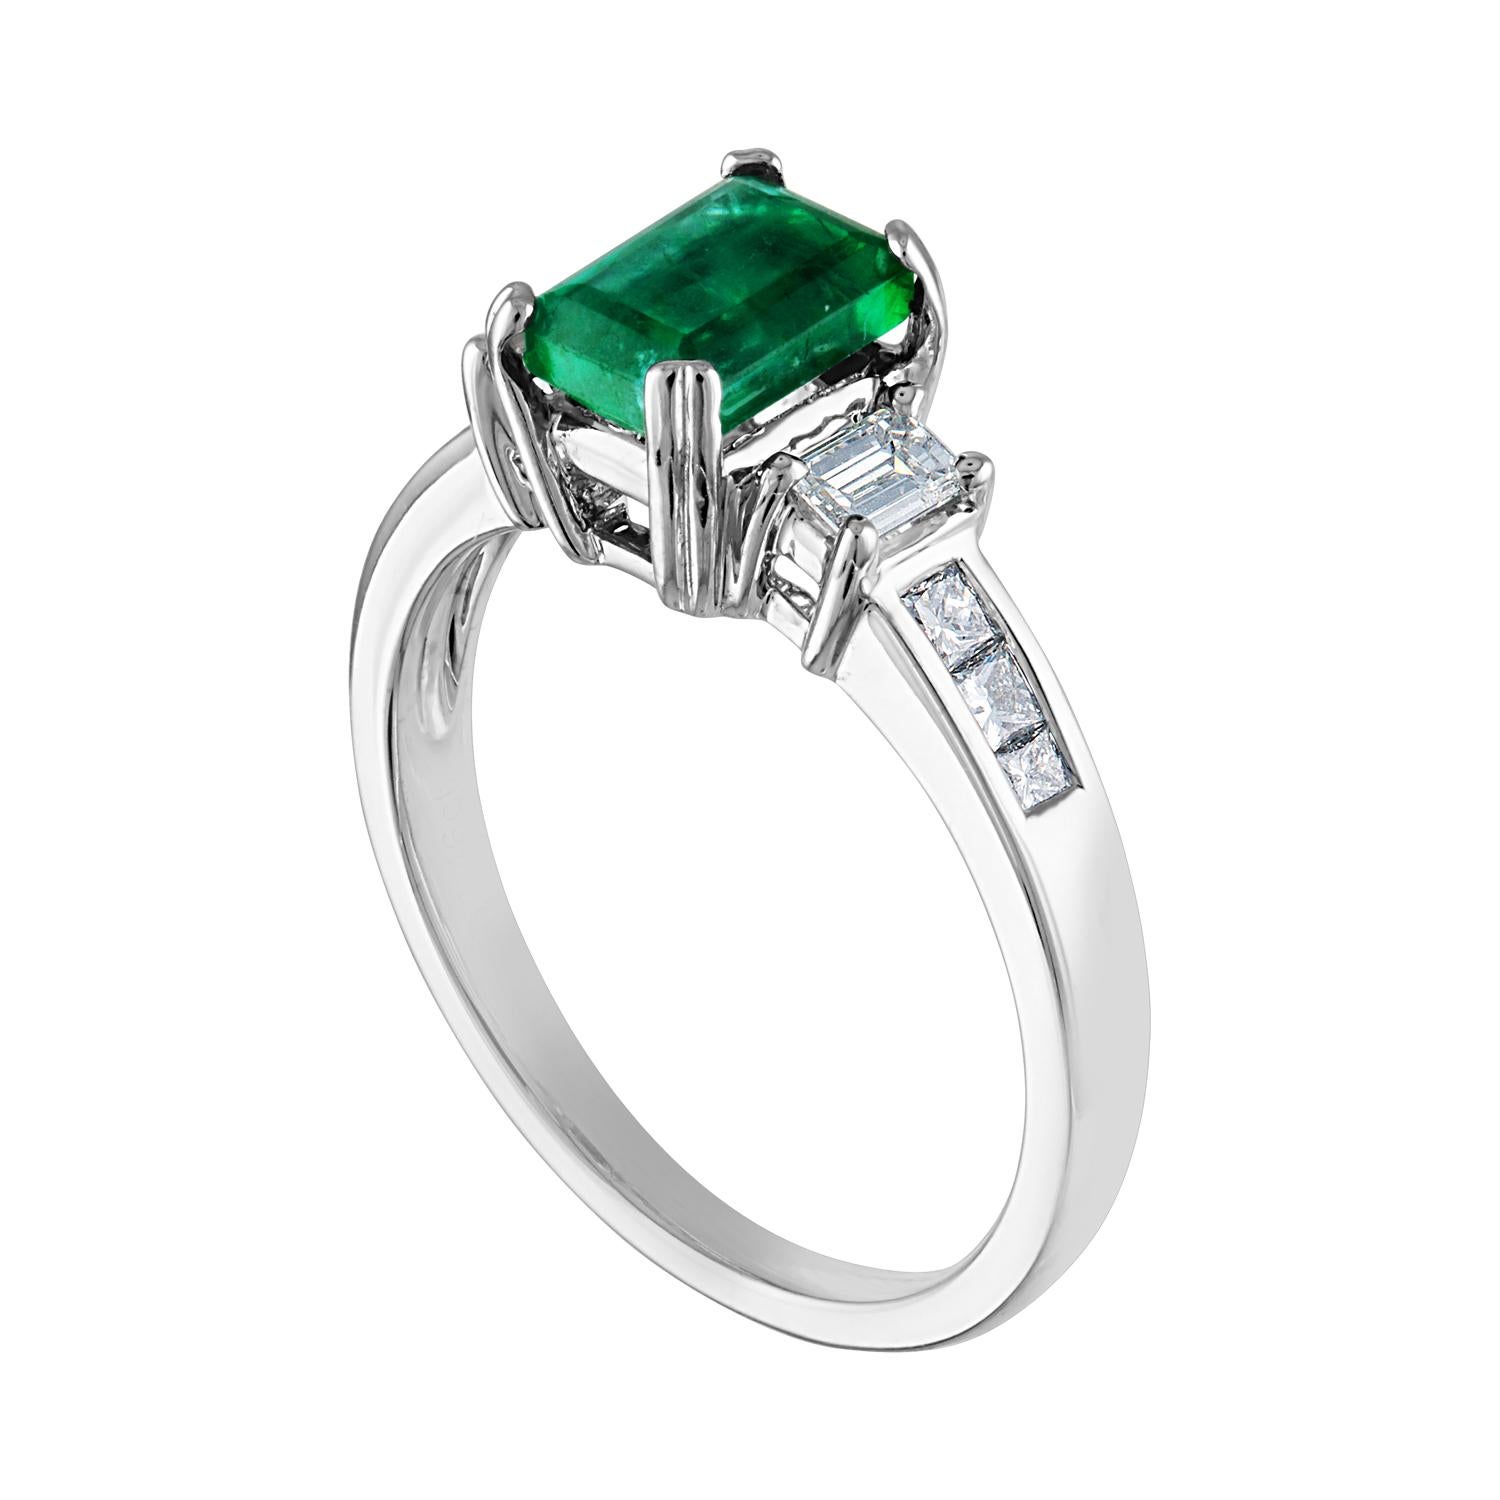 Beautiful 3 Stone Emerald Ring
The ring is 18K White Gold.
The Center is a beautiful emerald cut 1.15 Carat Emerald.
The Emerald is AGL certified.
There are 0.46 Carats Diamonds F/G VS/SI
The ring is a size 7.00, sizable.
The ring weighs 4.1 grams.